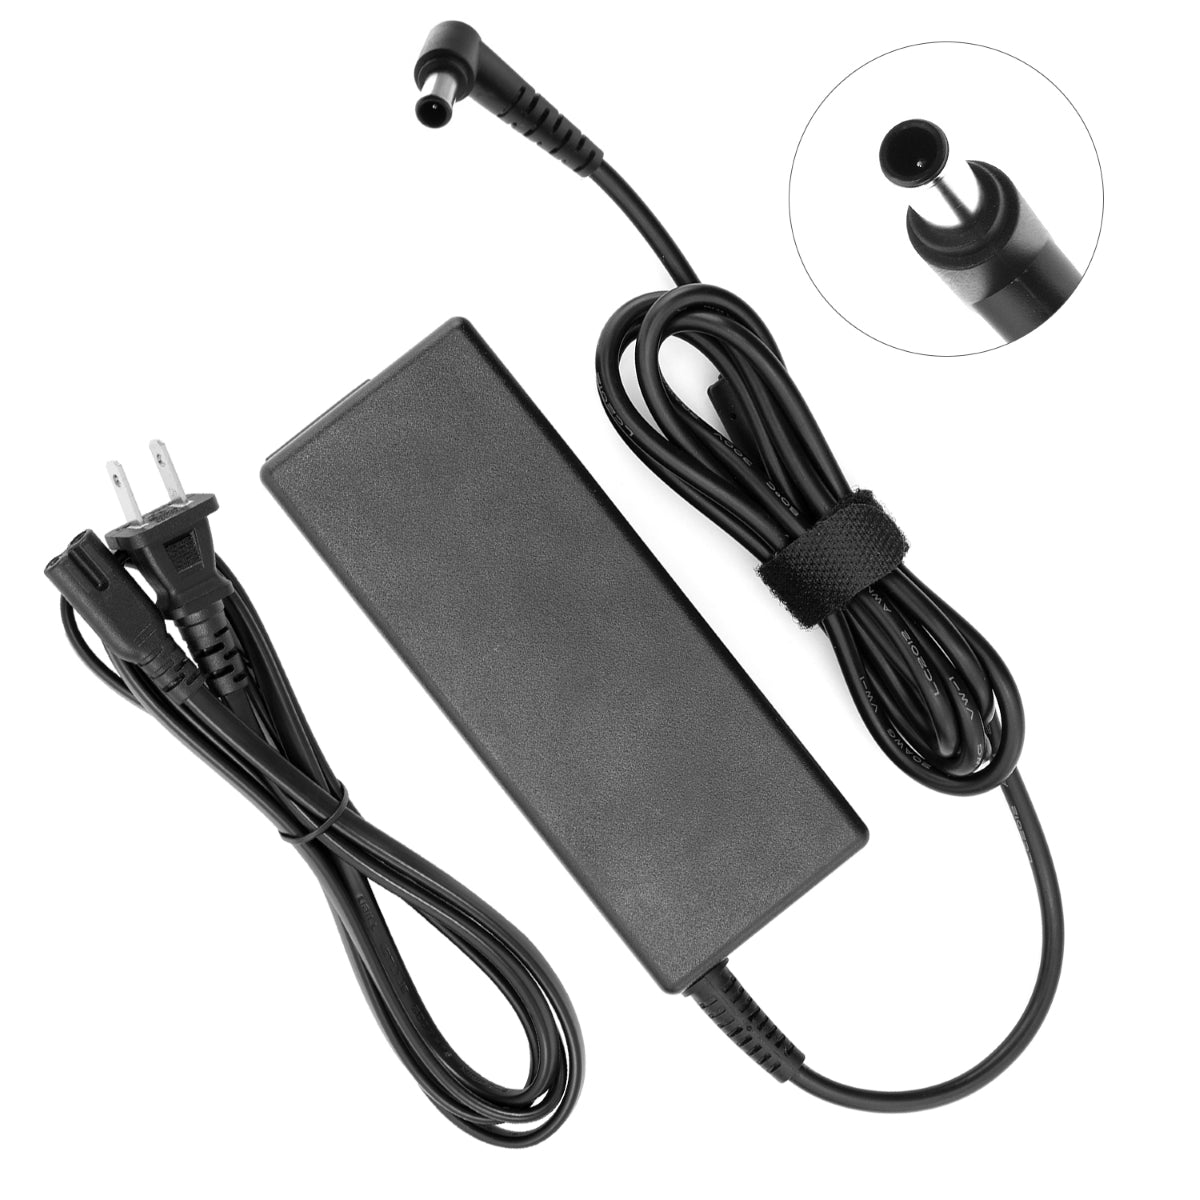 AC Adapter Power Supply for Samsung U24E590D Monitor